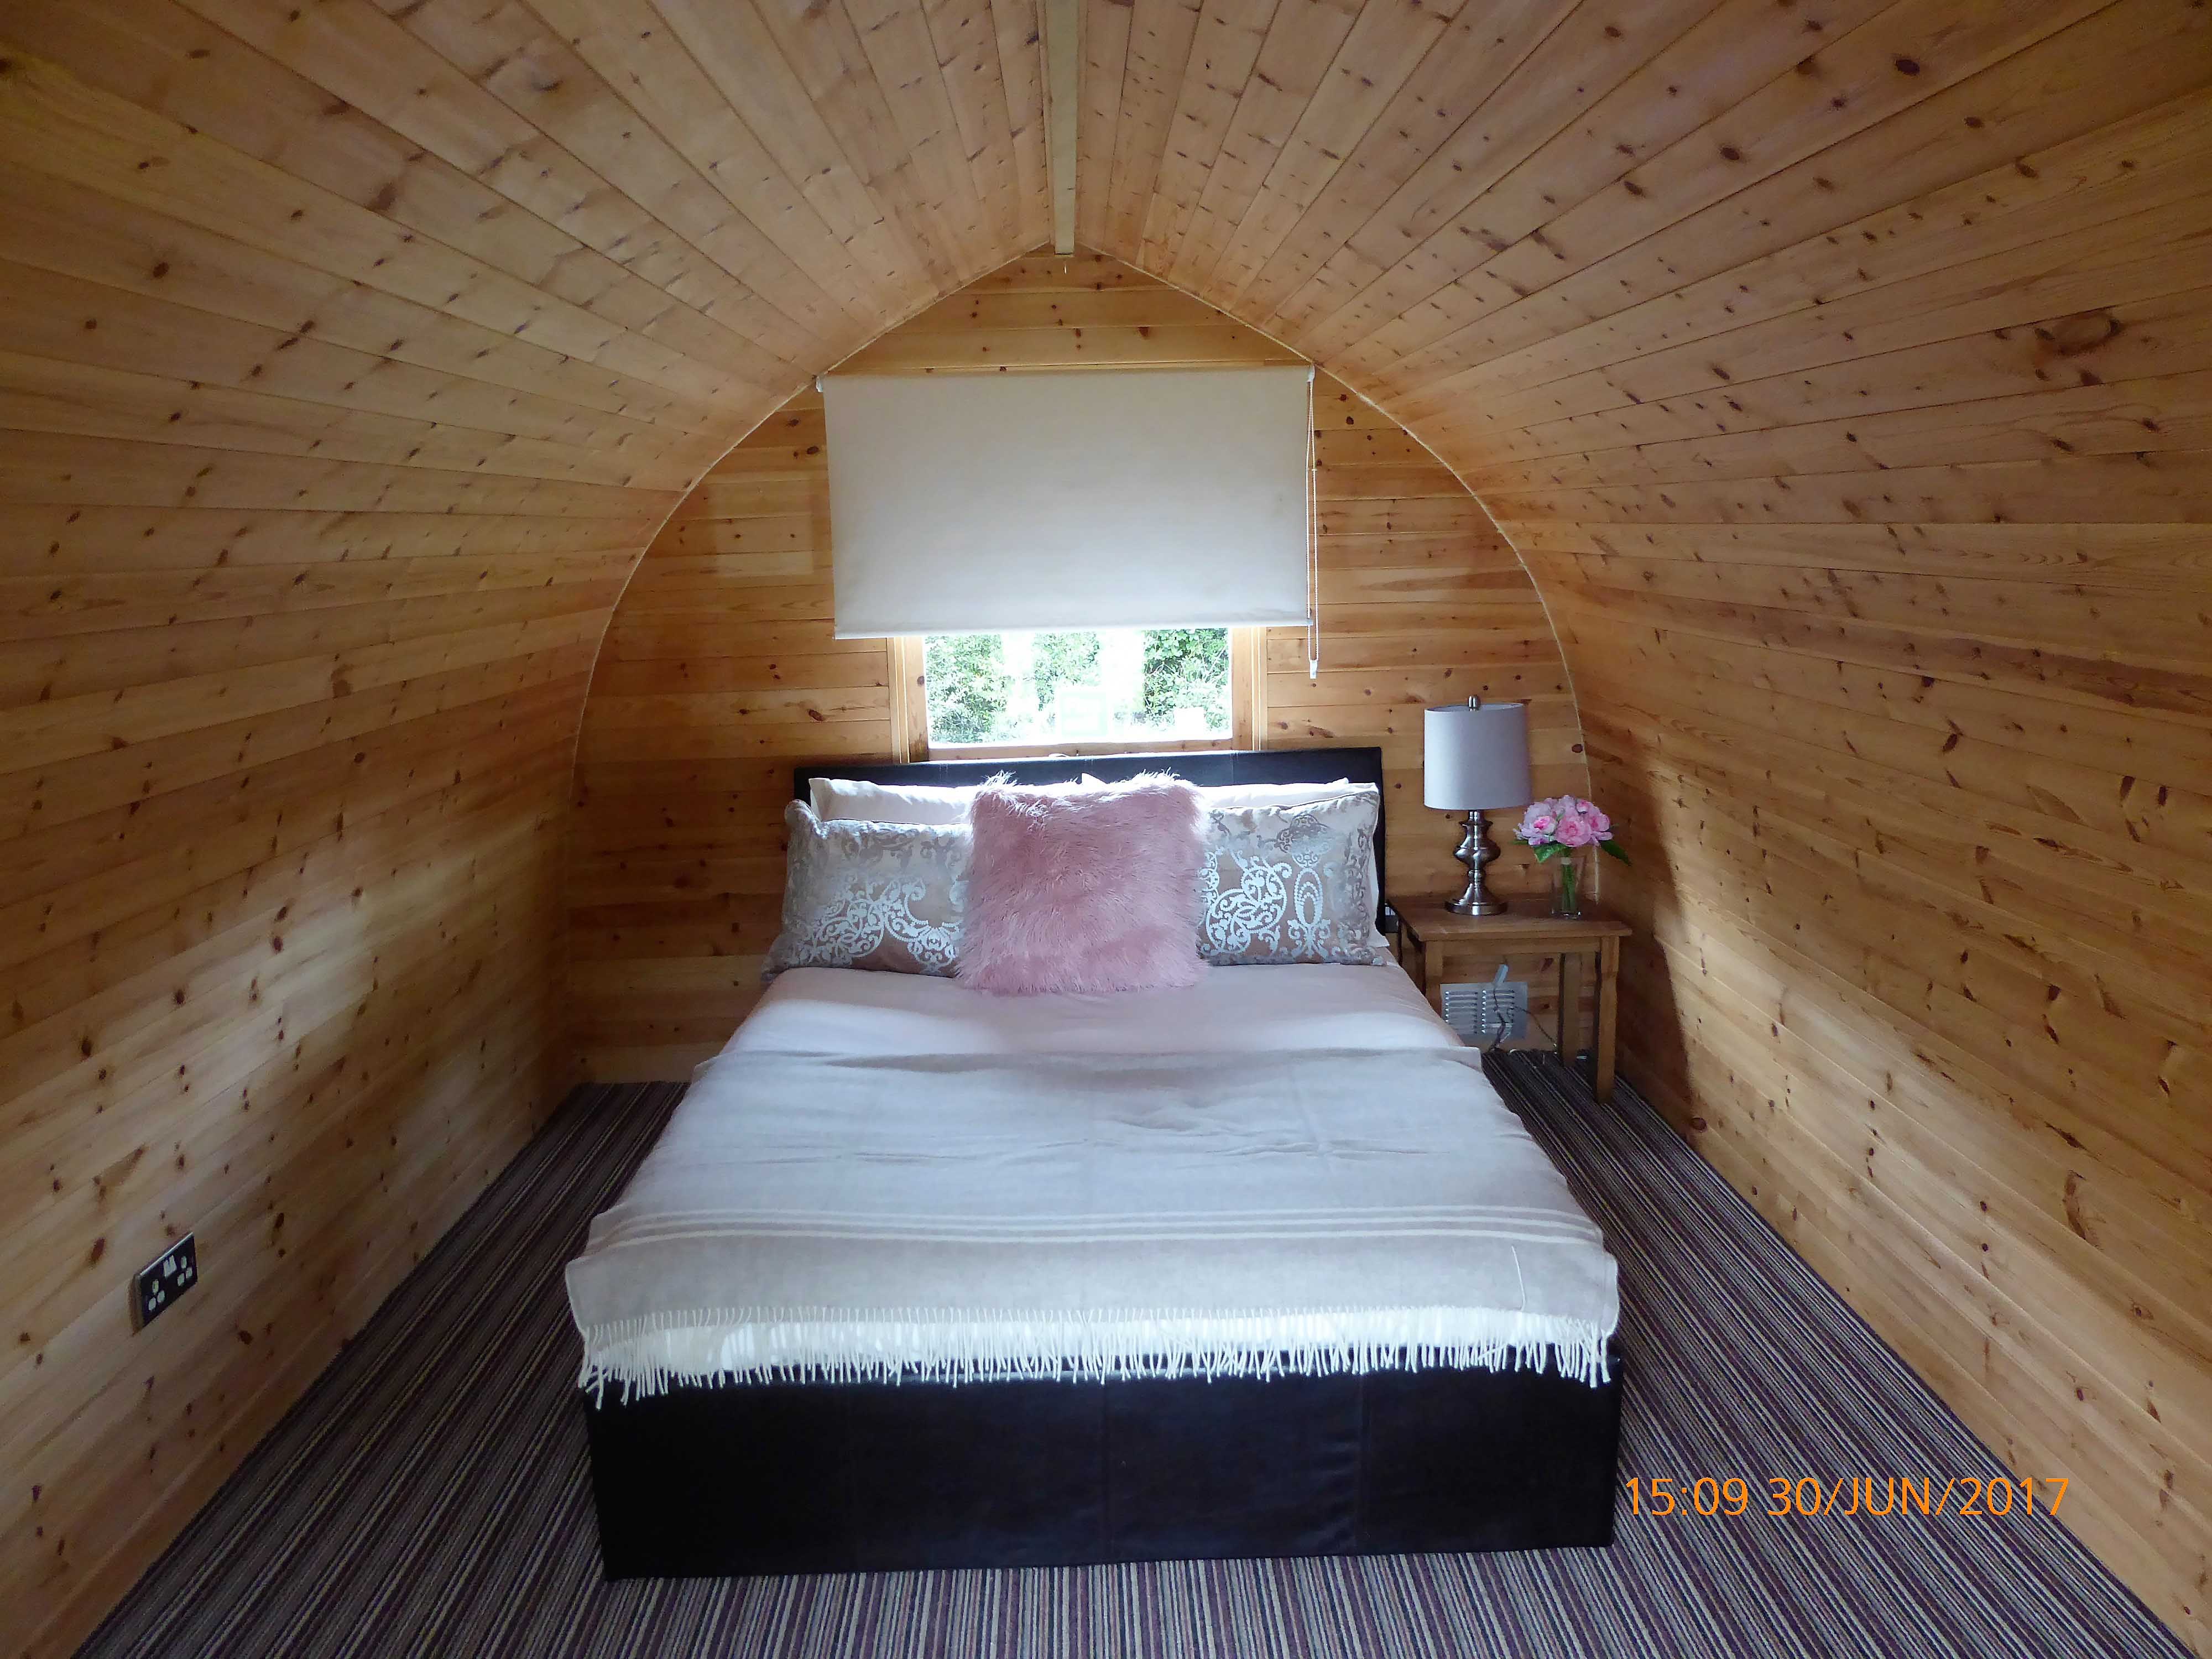 Pitch and Canvas | Glamping and Camping in Cheshire | Bed in Luxury Pod